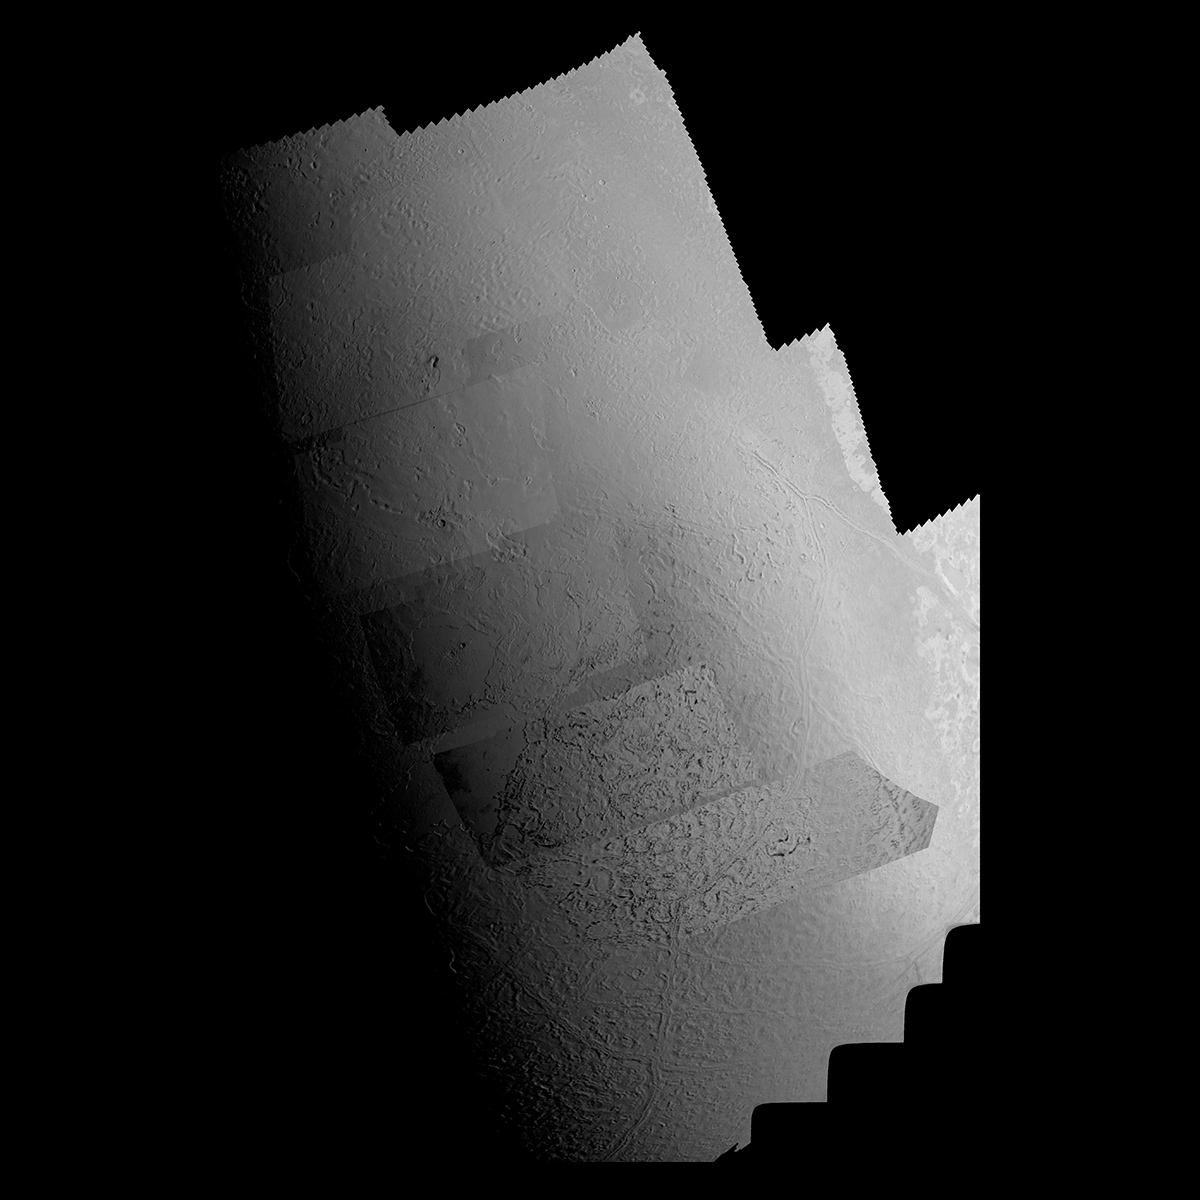 This picture of Triton is a mosaic of the highest resolution images taken by Voyager 2 on Aug. 25, 1989 from a distance of about 40,000 kilometers (24,800 miles).